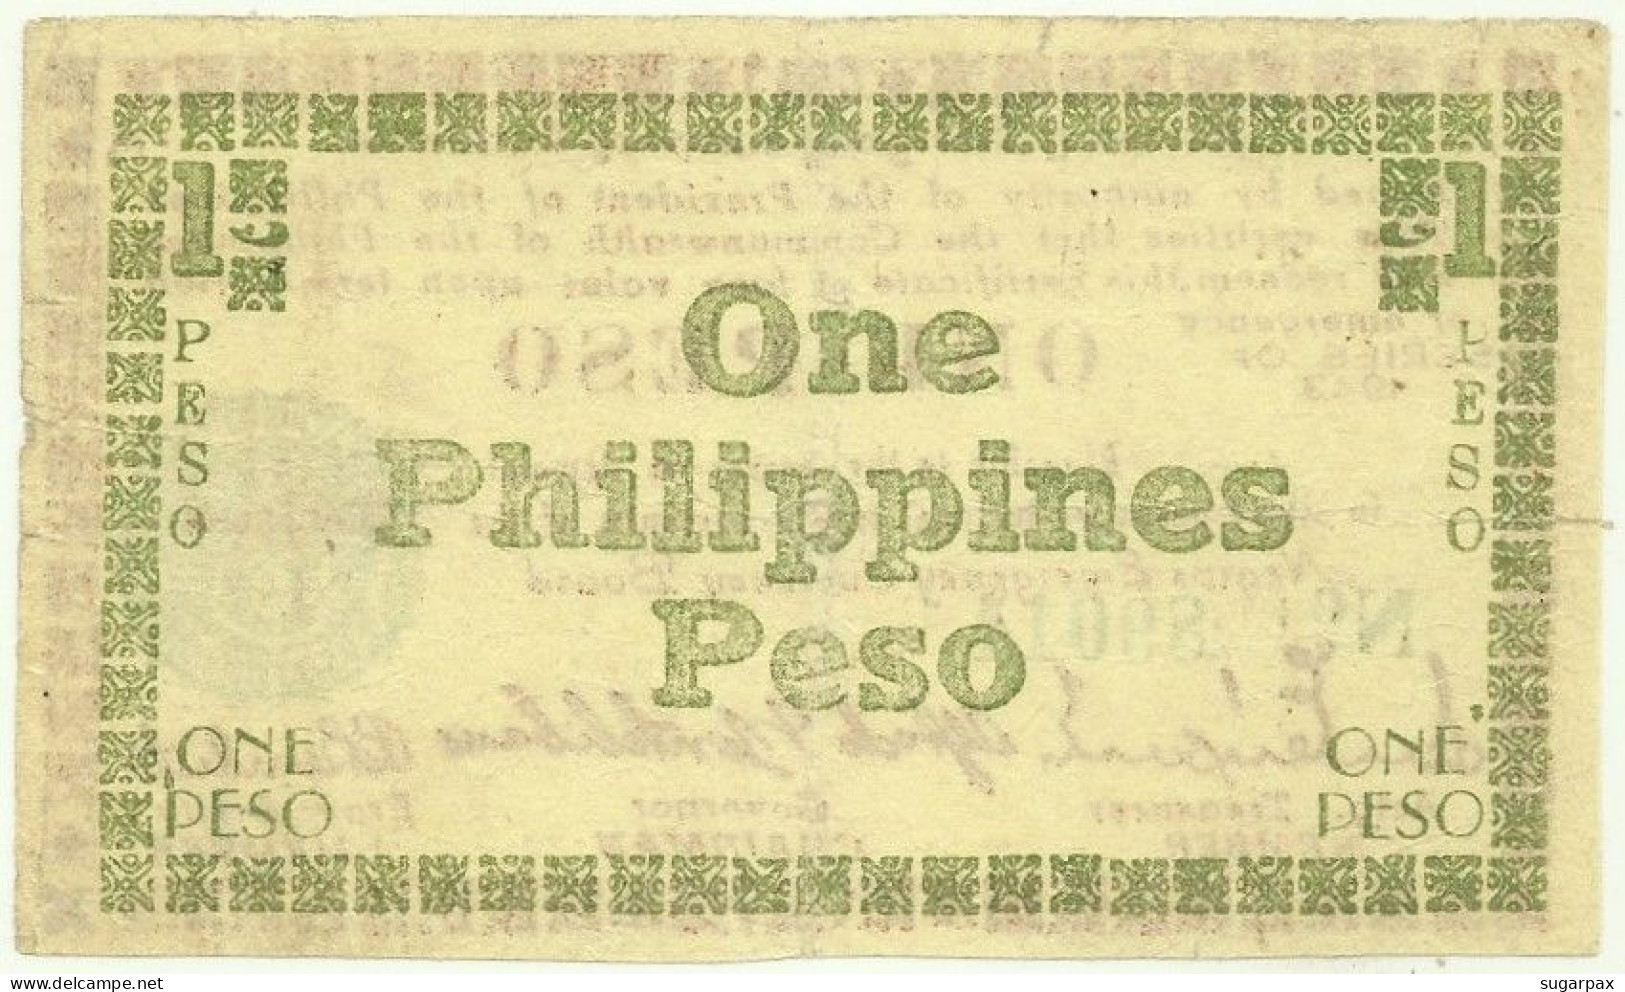 PHILIPPINES - 1 Peso - 1943 - Pick S 661 - Serie A1 - Negros Emergency Currency Board - Philippines